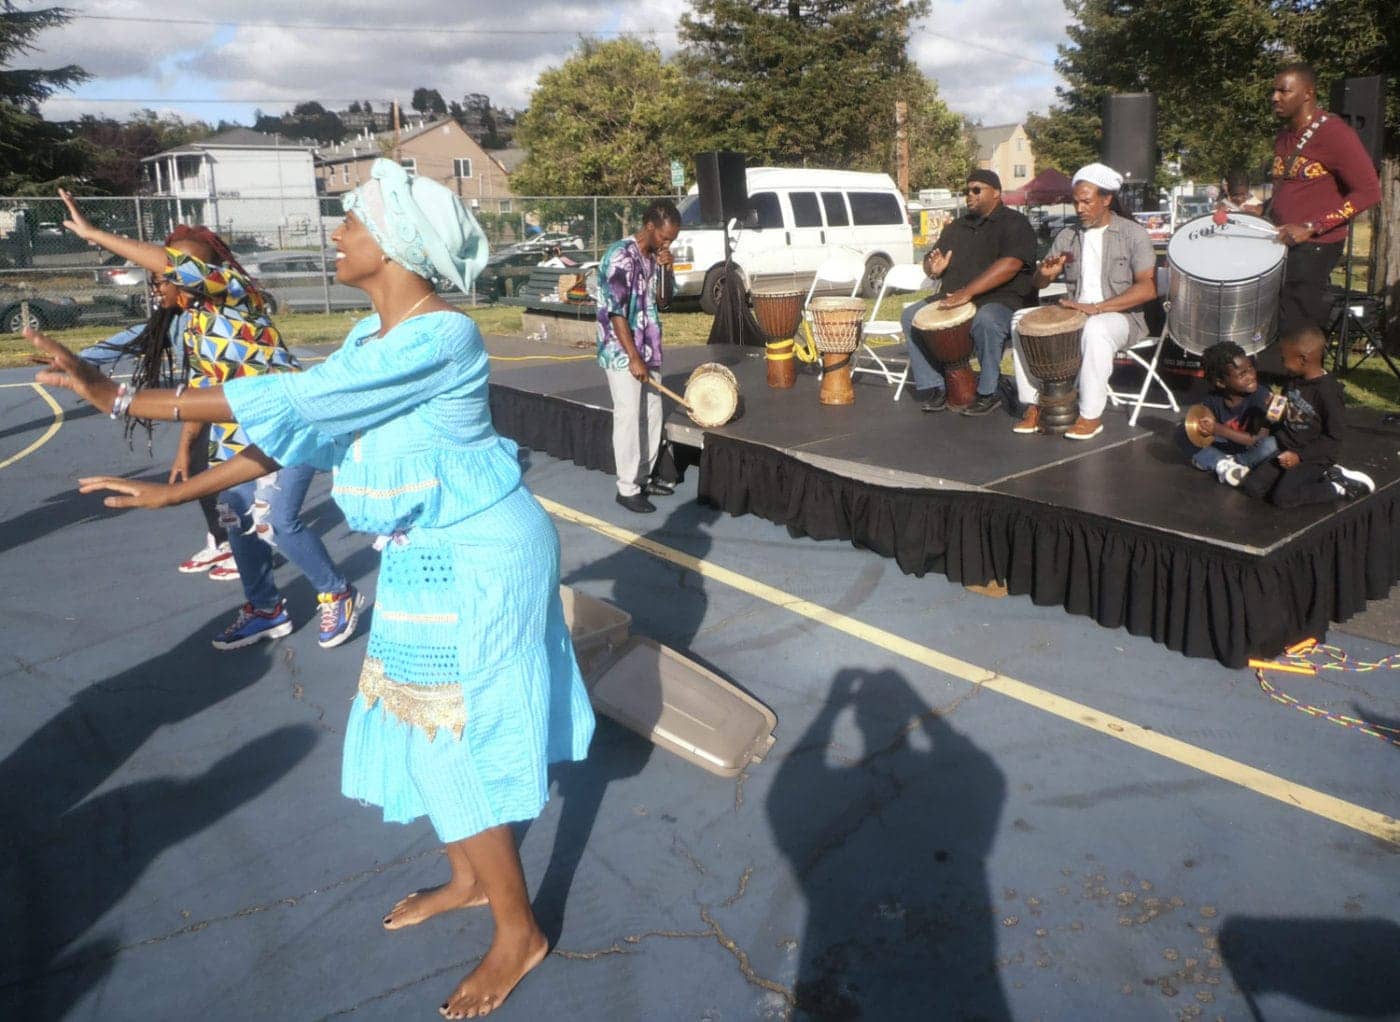 Afrikan-Drummers-Dancers-and-Jahaharas-shadow-at-Juneteenth-Freedom-Friday-Commemoration-at-Verdace-Carter-Park-in-deep-east-actually-far-southside-OHLONE-Oakland-1400x1022, Abort the patriarchy! Abolish slavery! Dance to life!, News & Views 